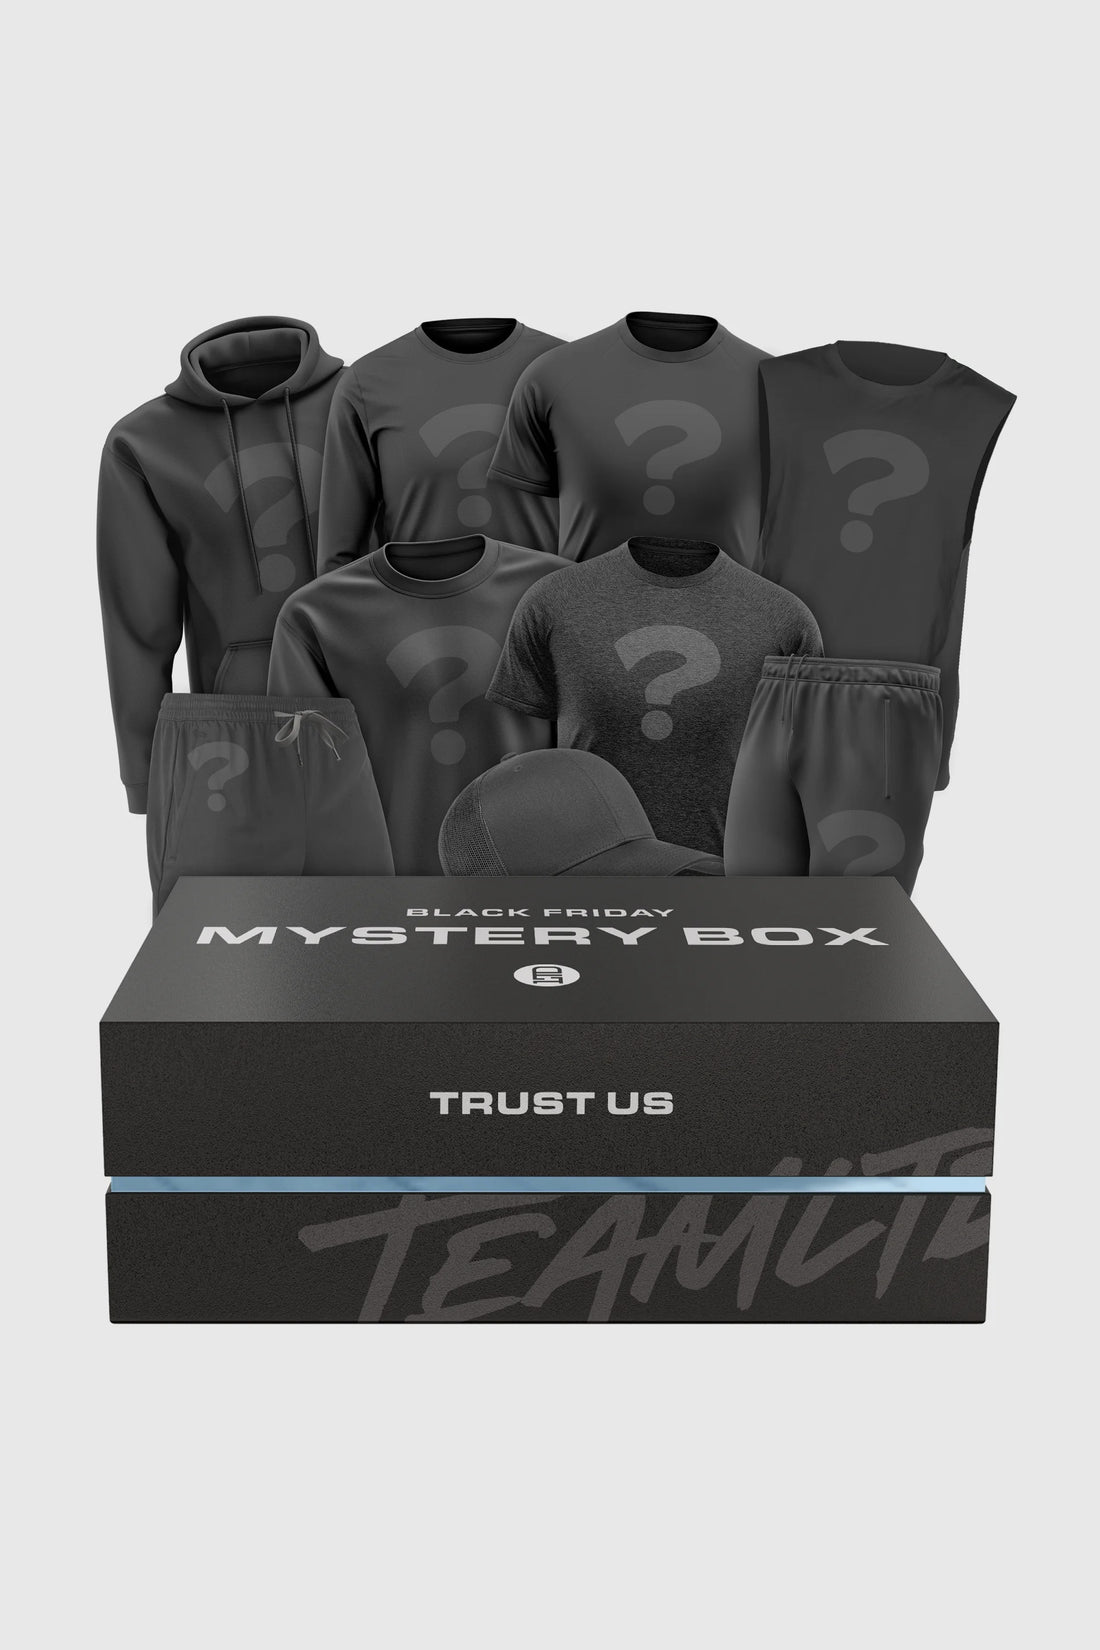 Mens Double Trust Us Mystery Box